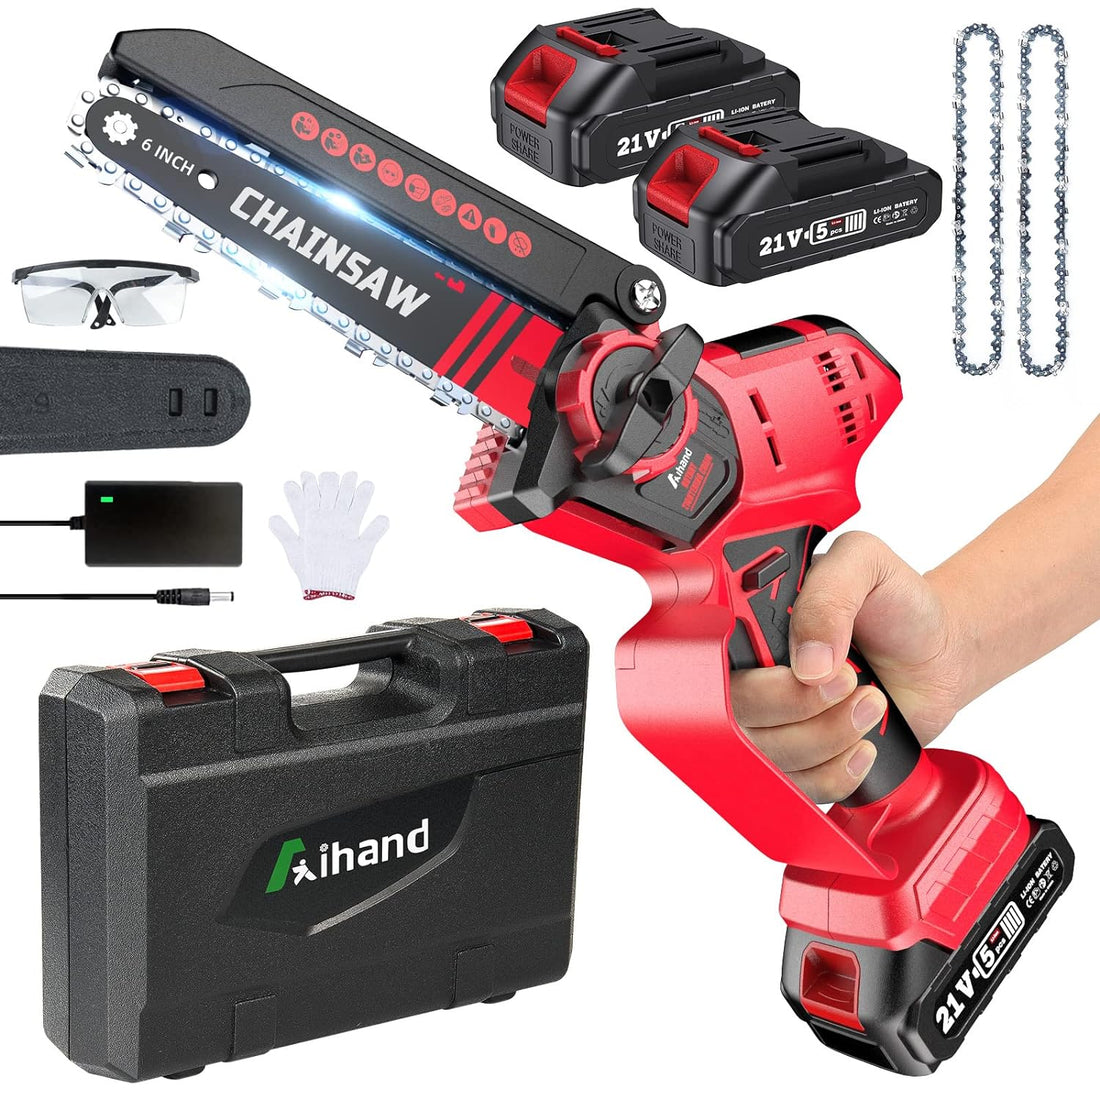 Aihand 6 Inch Mini Chainsaw With 2 Battery, Adjust Tension Cordlss Chainsaw with Chain